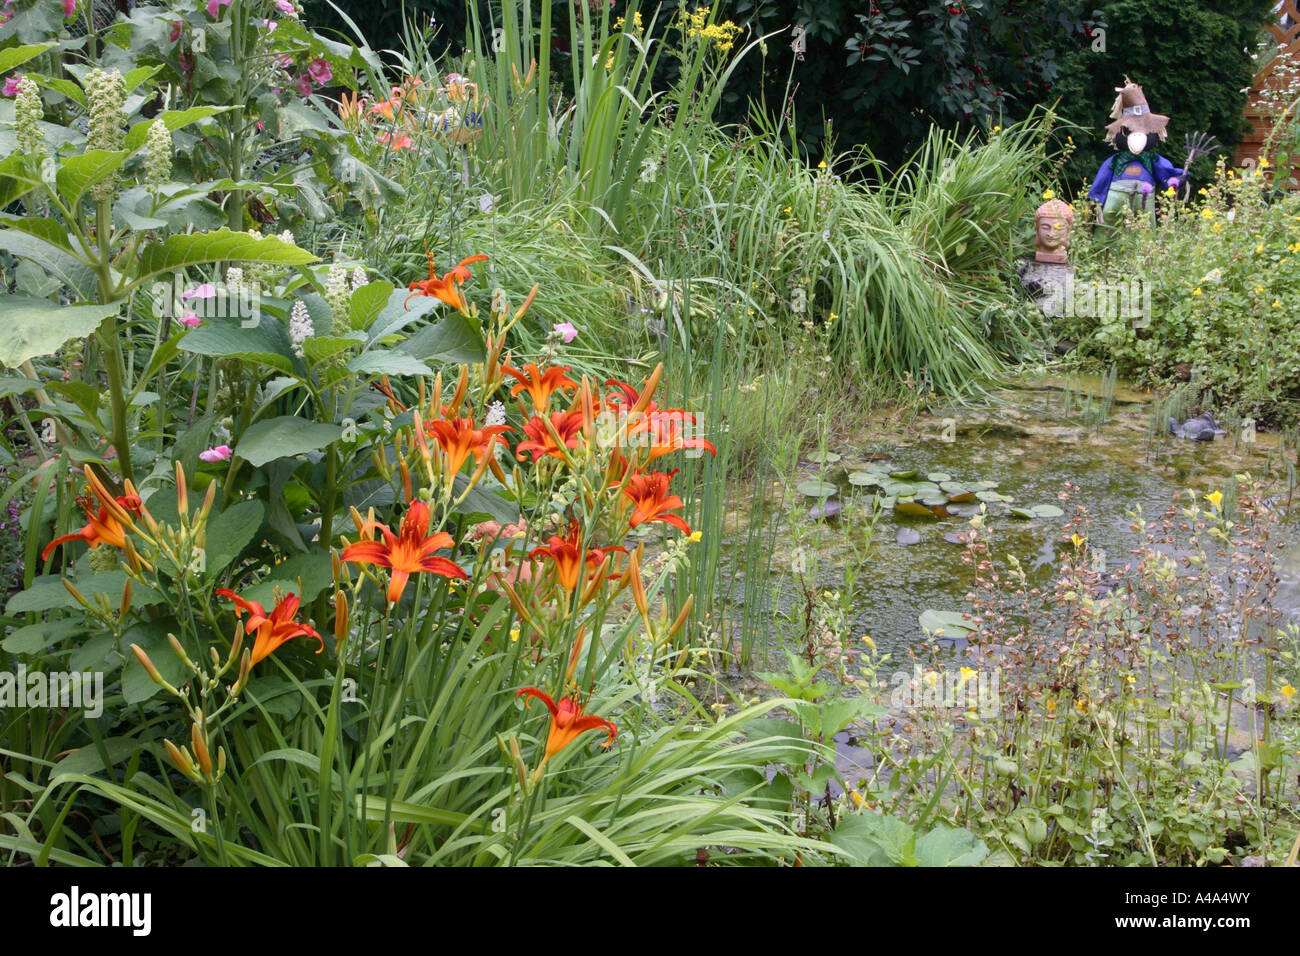 garden pond with flowers in summer Stock Photo